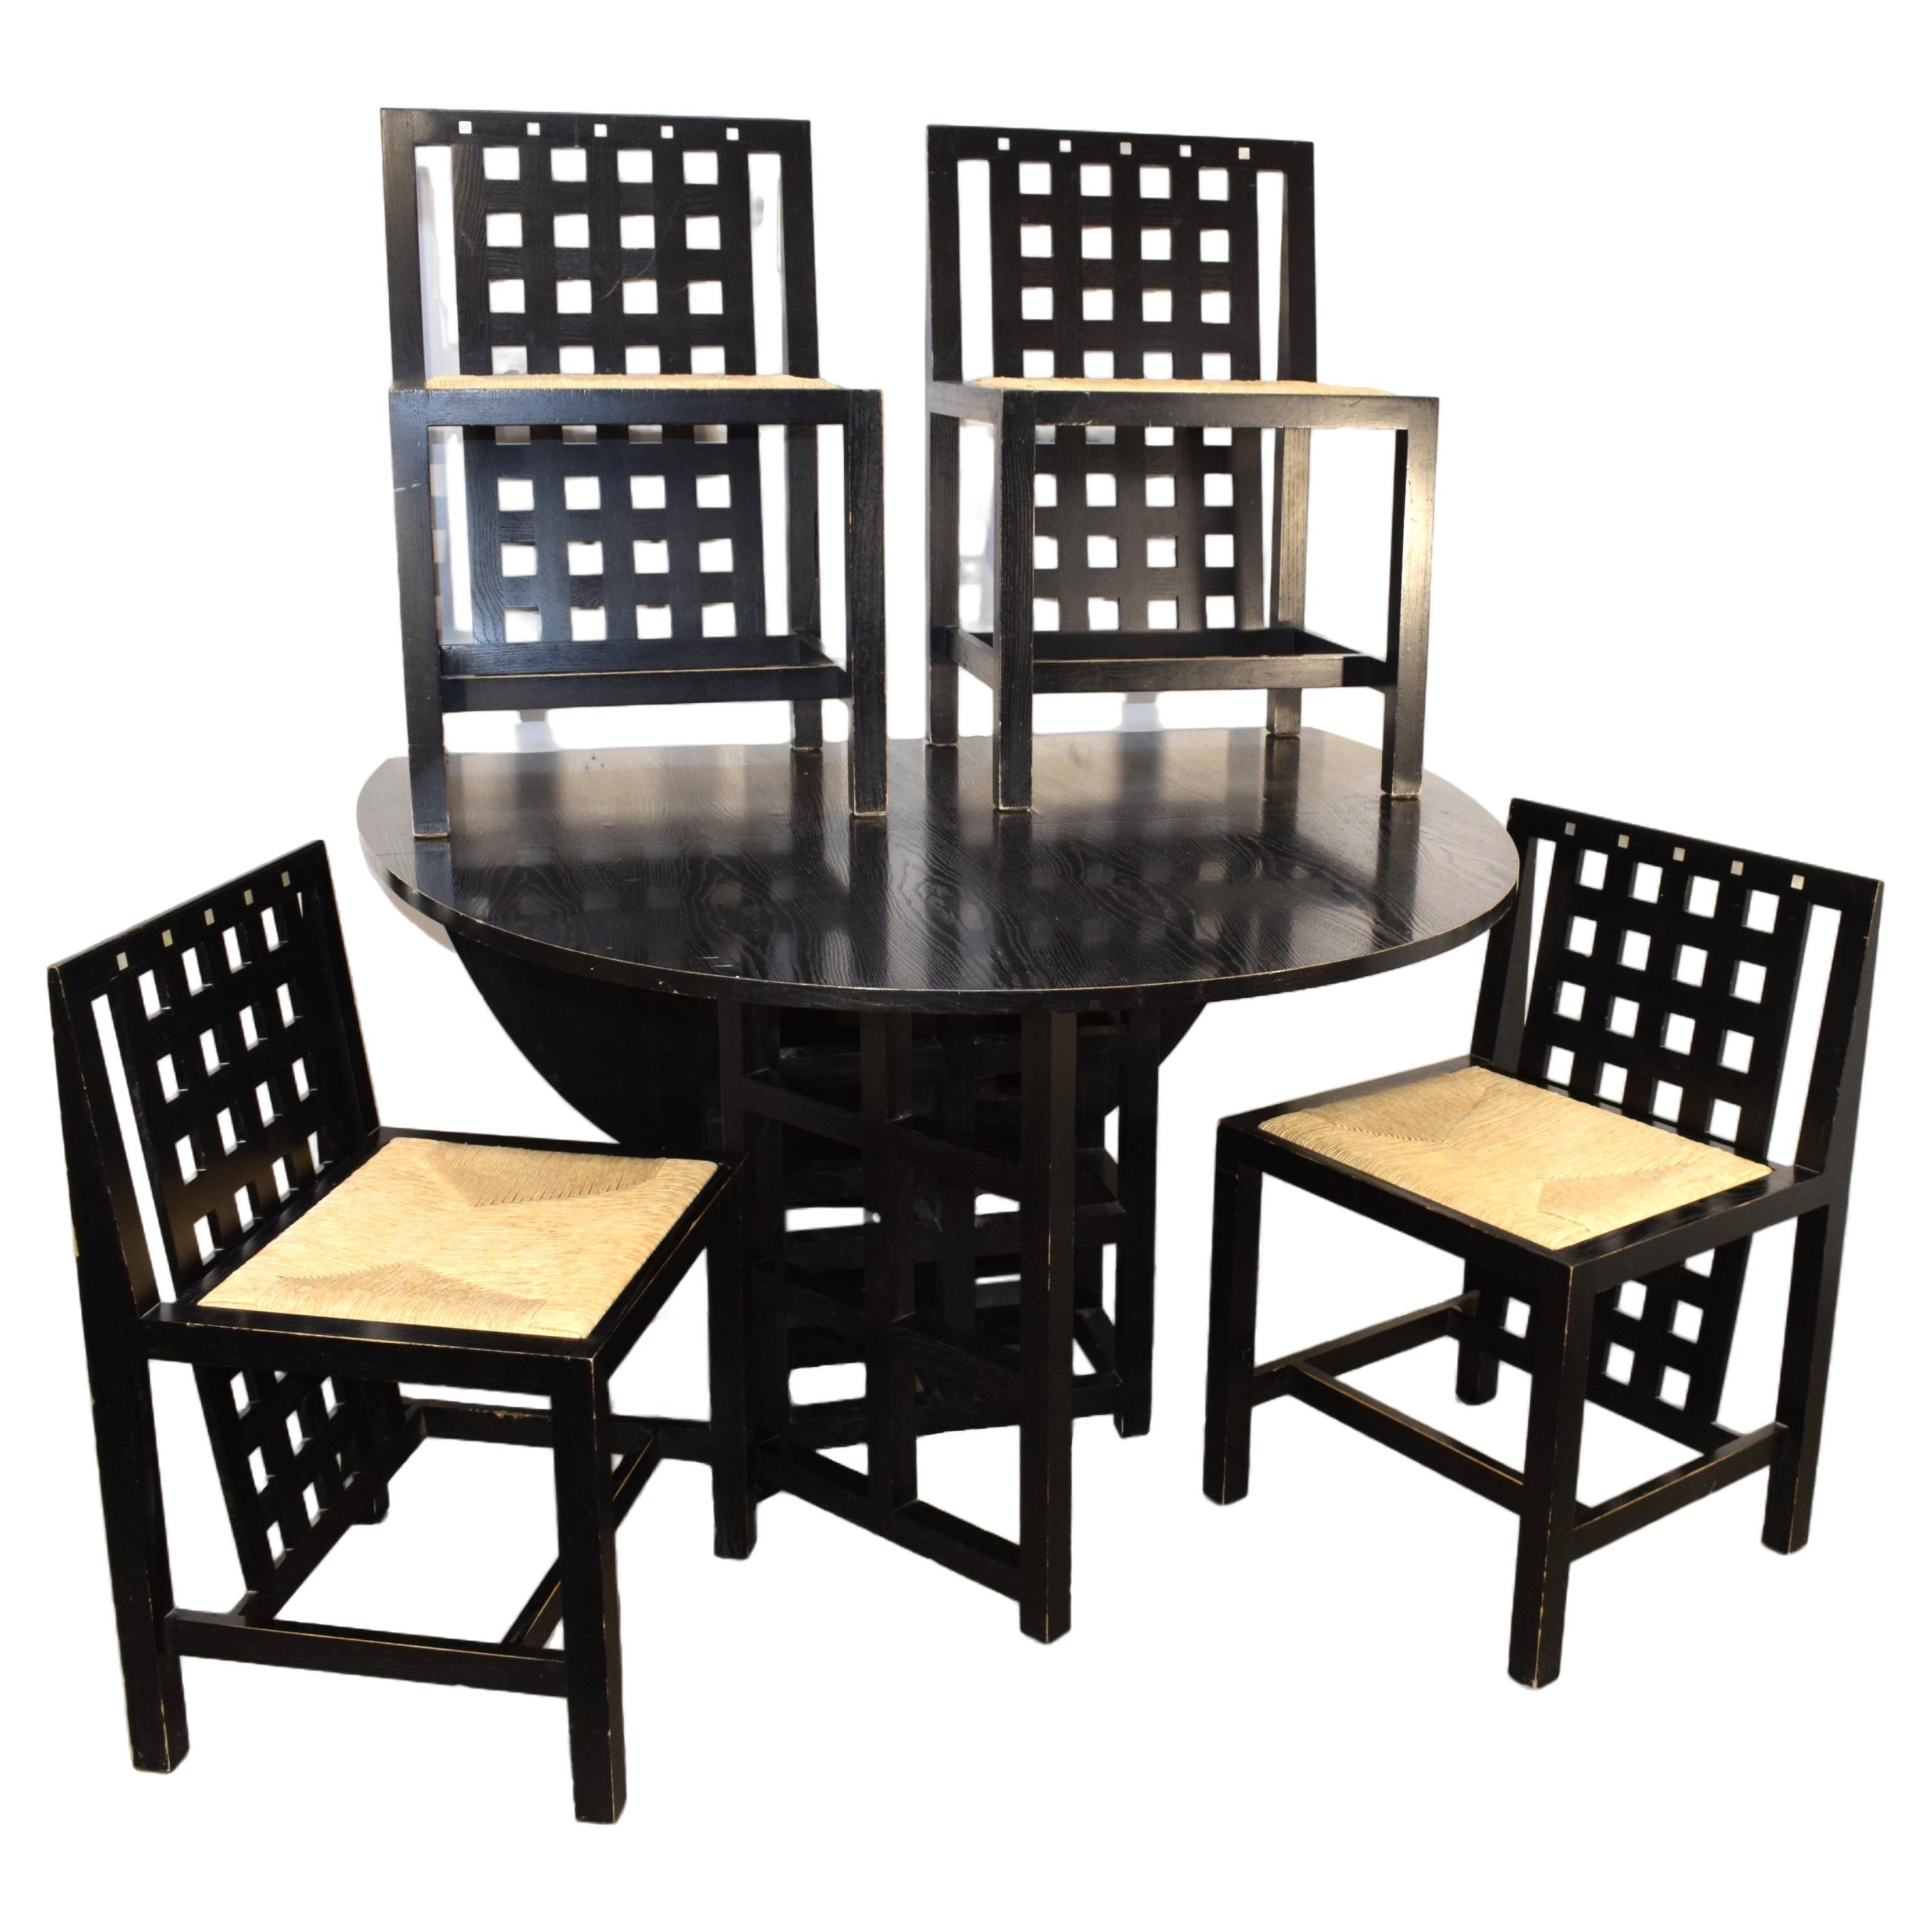 Dining table and 4 chairs by Charles Rennie Mackintosh for Cassina, 1970s